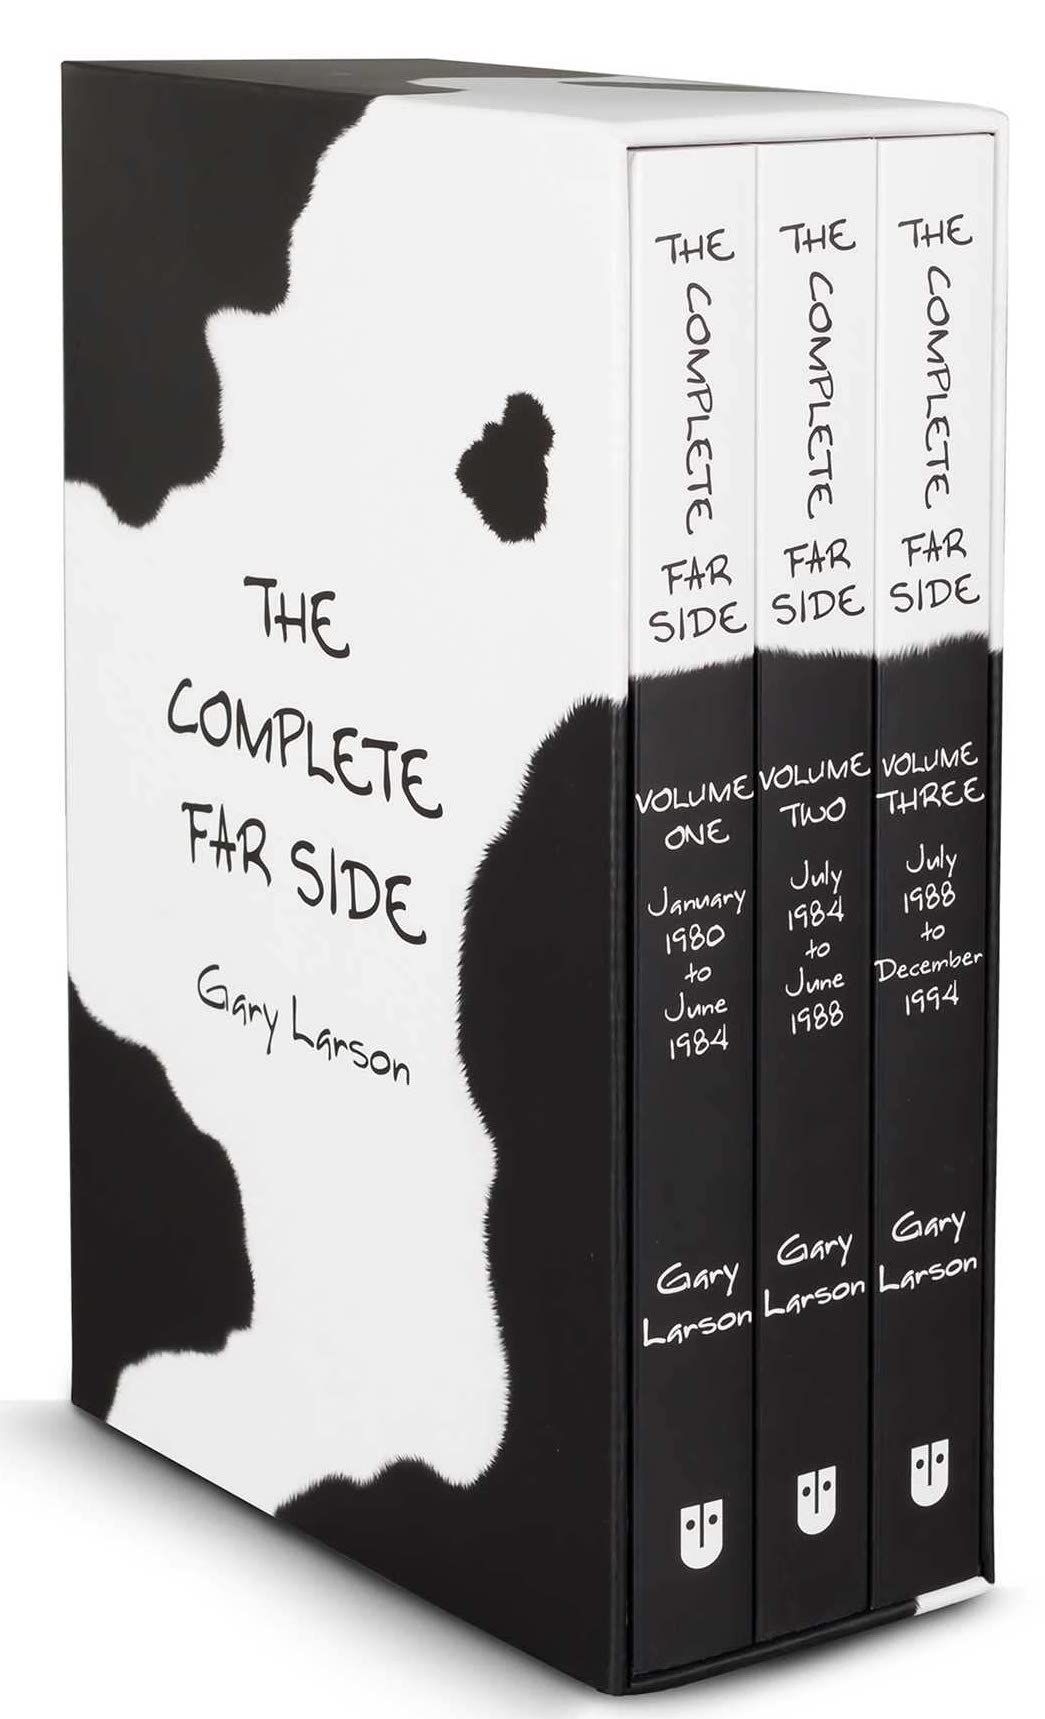 The Complete Far Side box set